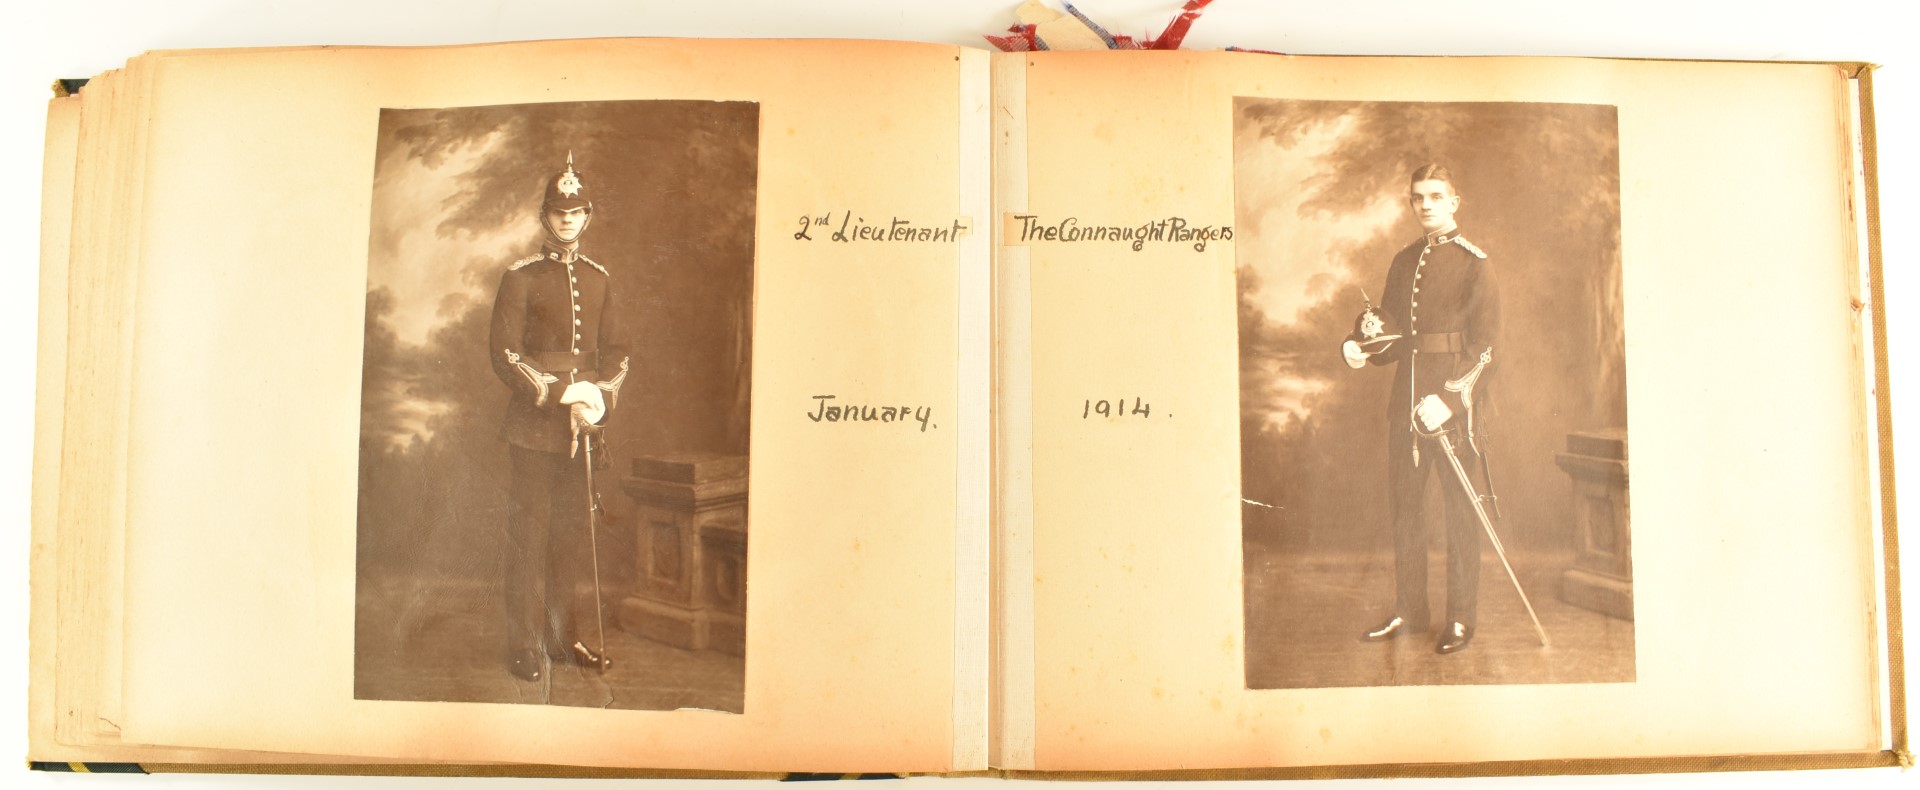 Photograph album compiled by 2nd Lieutenant Victor A Lentaigne whilst at the Royal Military College, - Image 9 of 12